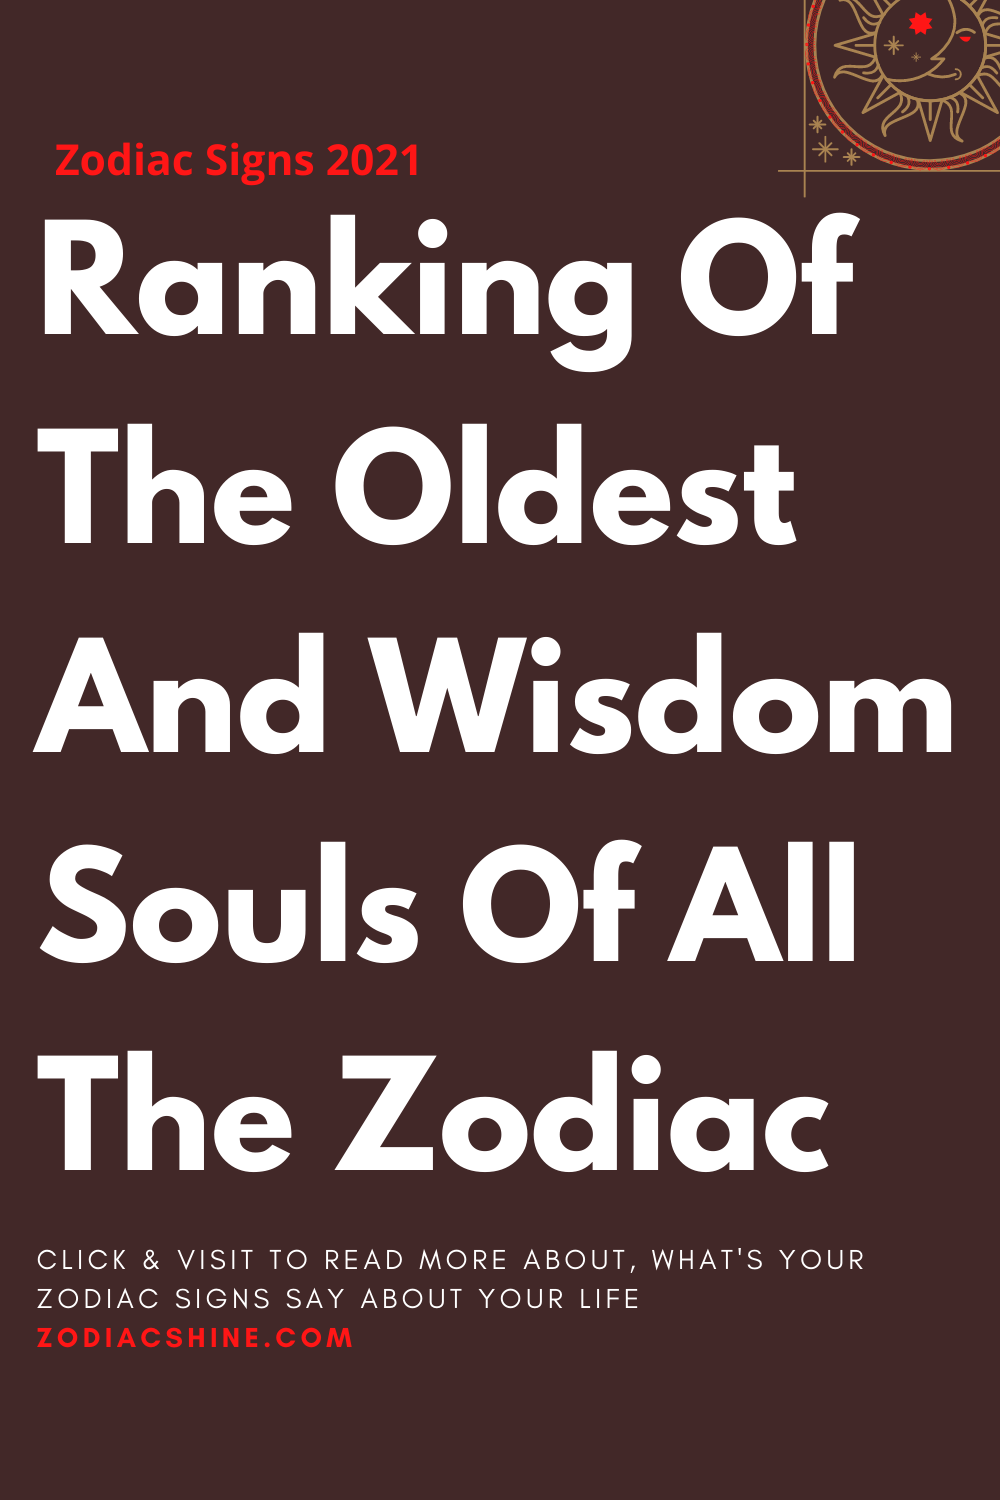 Ranking Of The Oldest And Wisdom Souls Of All The Zodiac